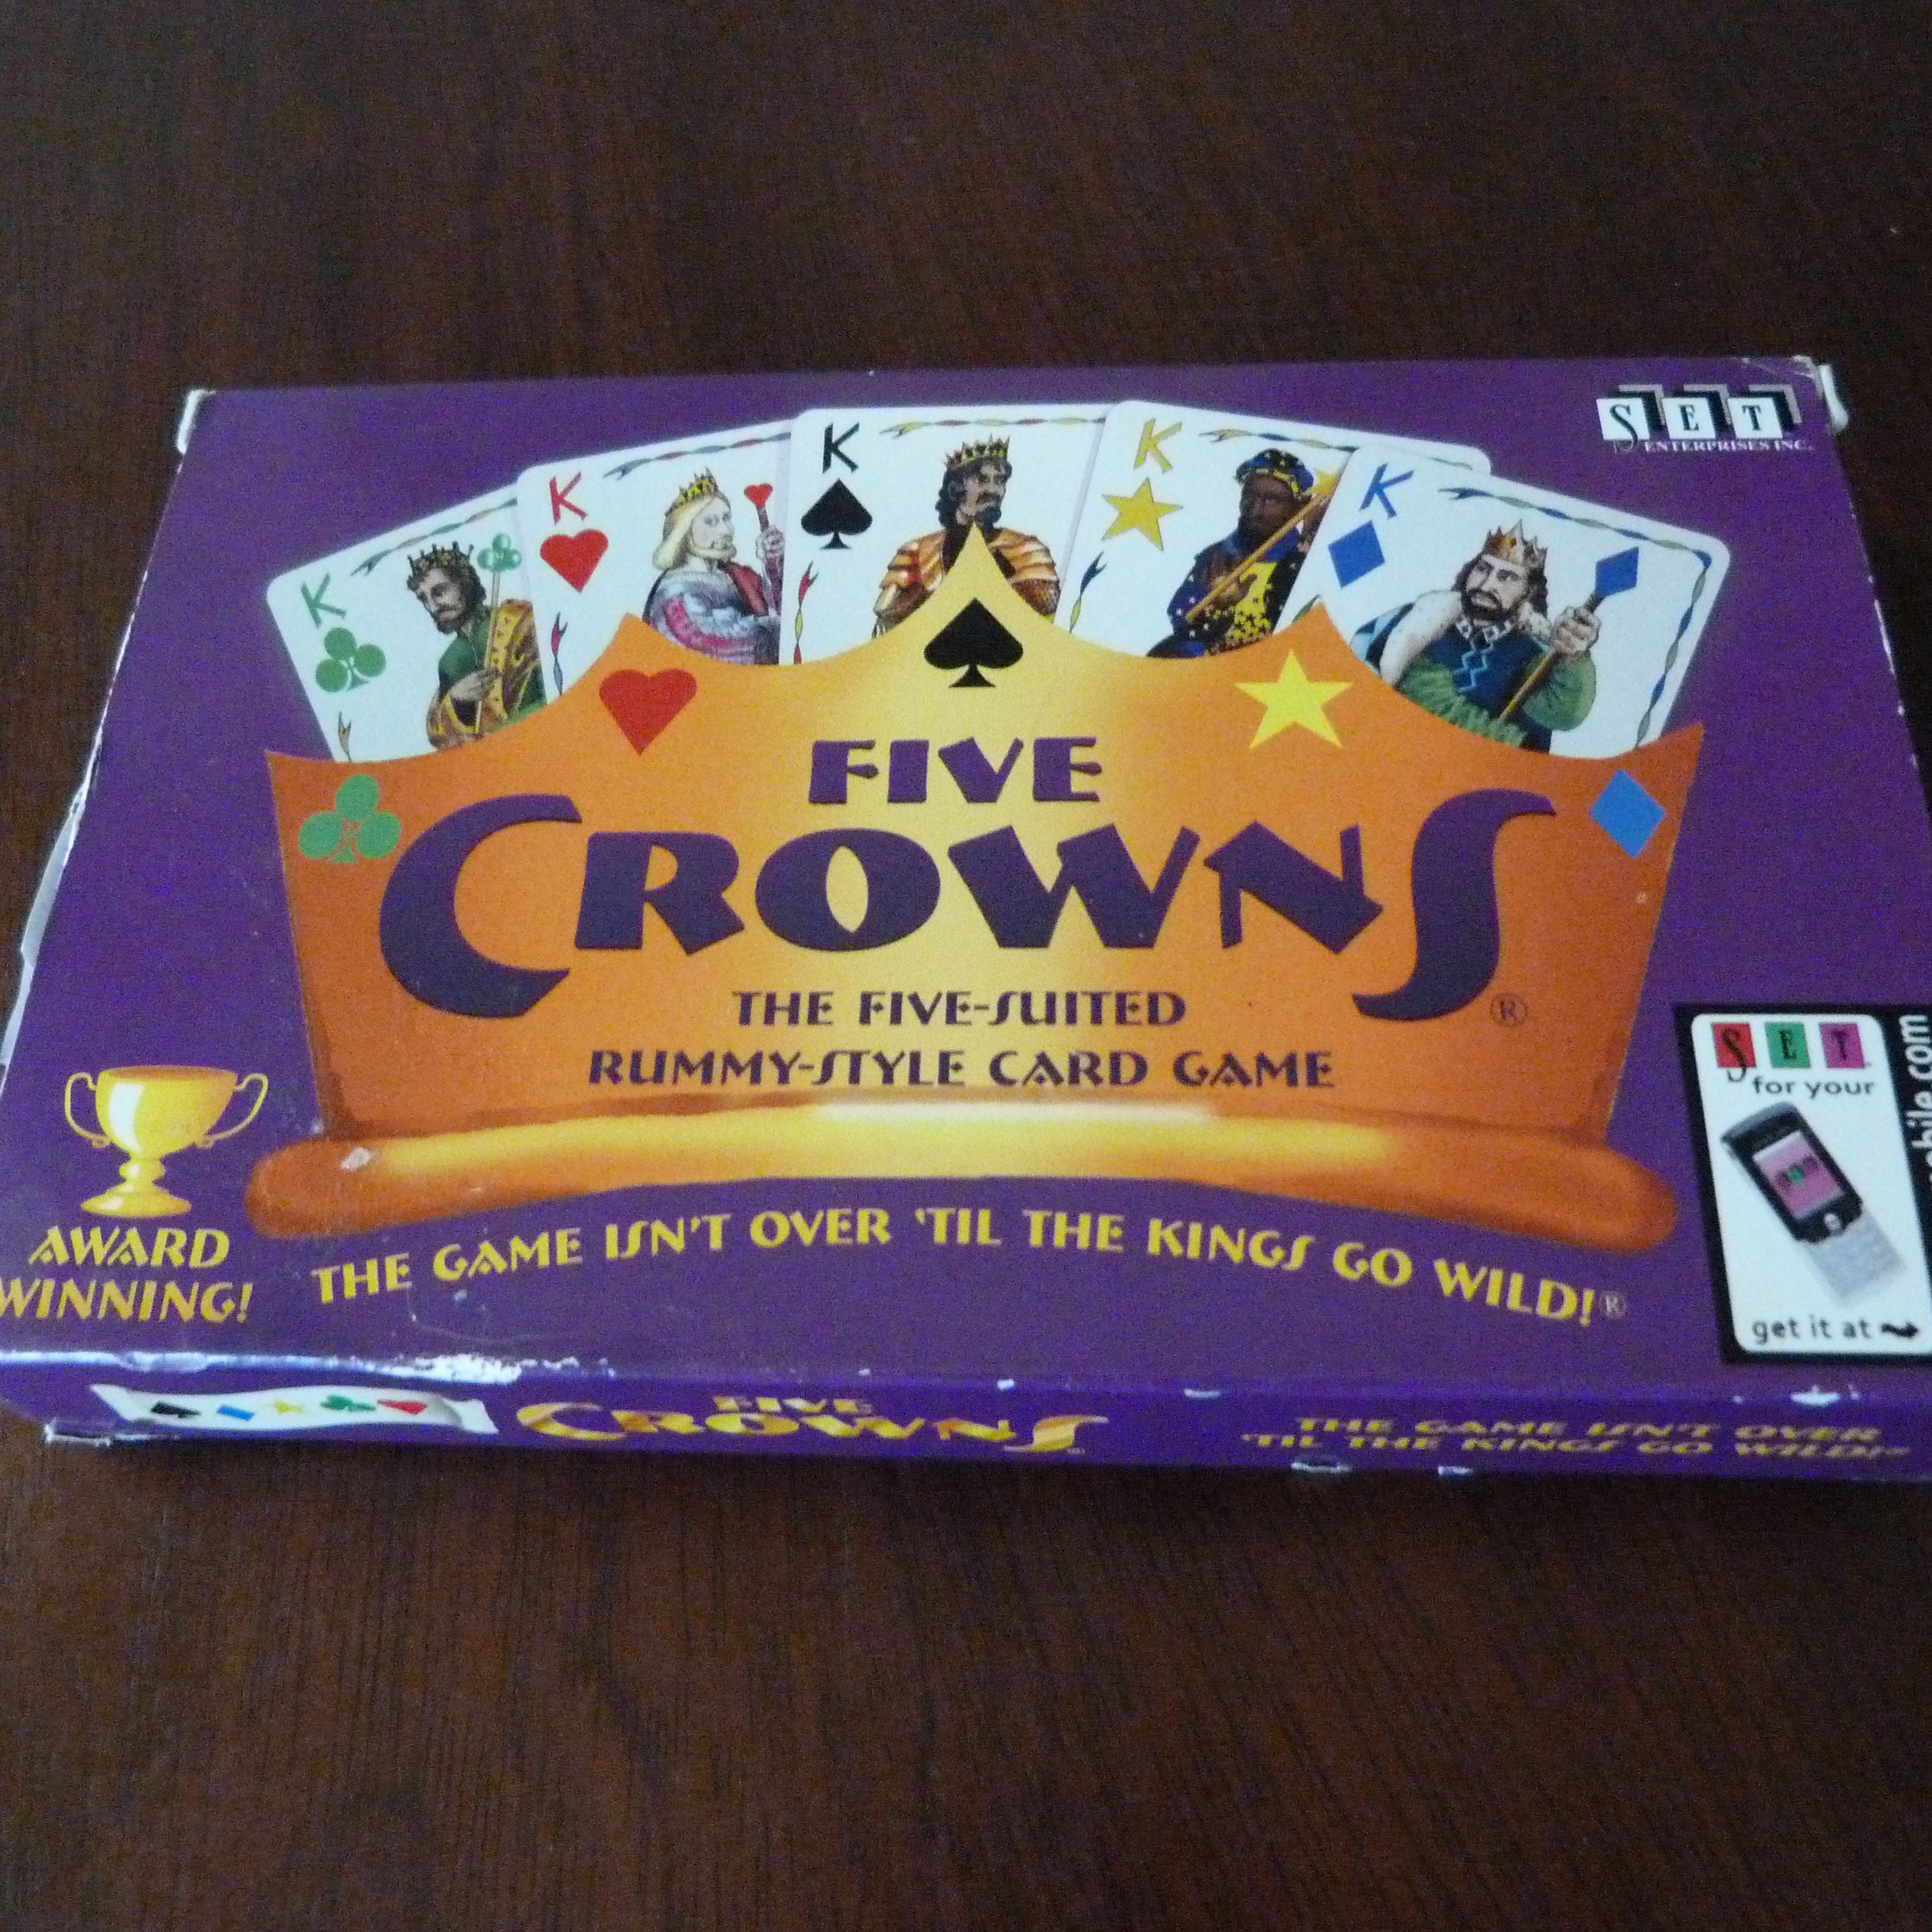 Five Crowns The Five-Suited Rummy-Style Card Game